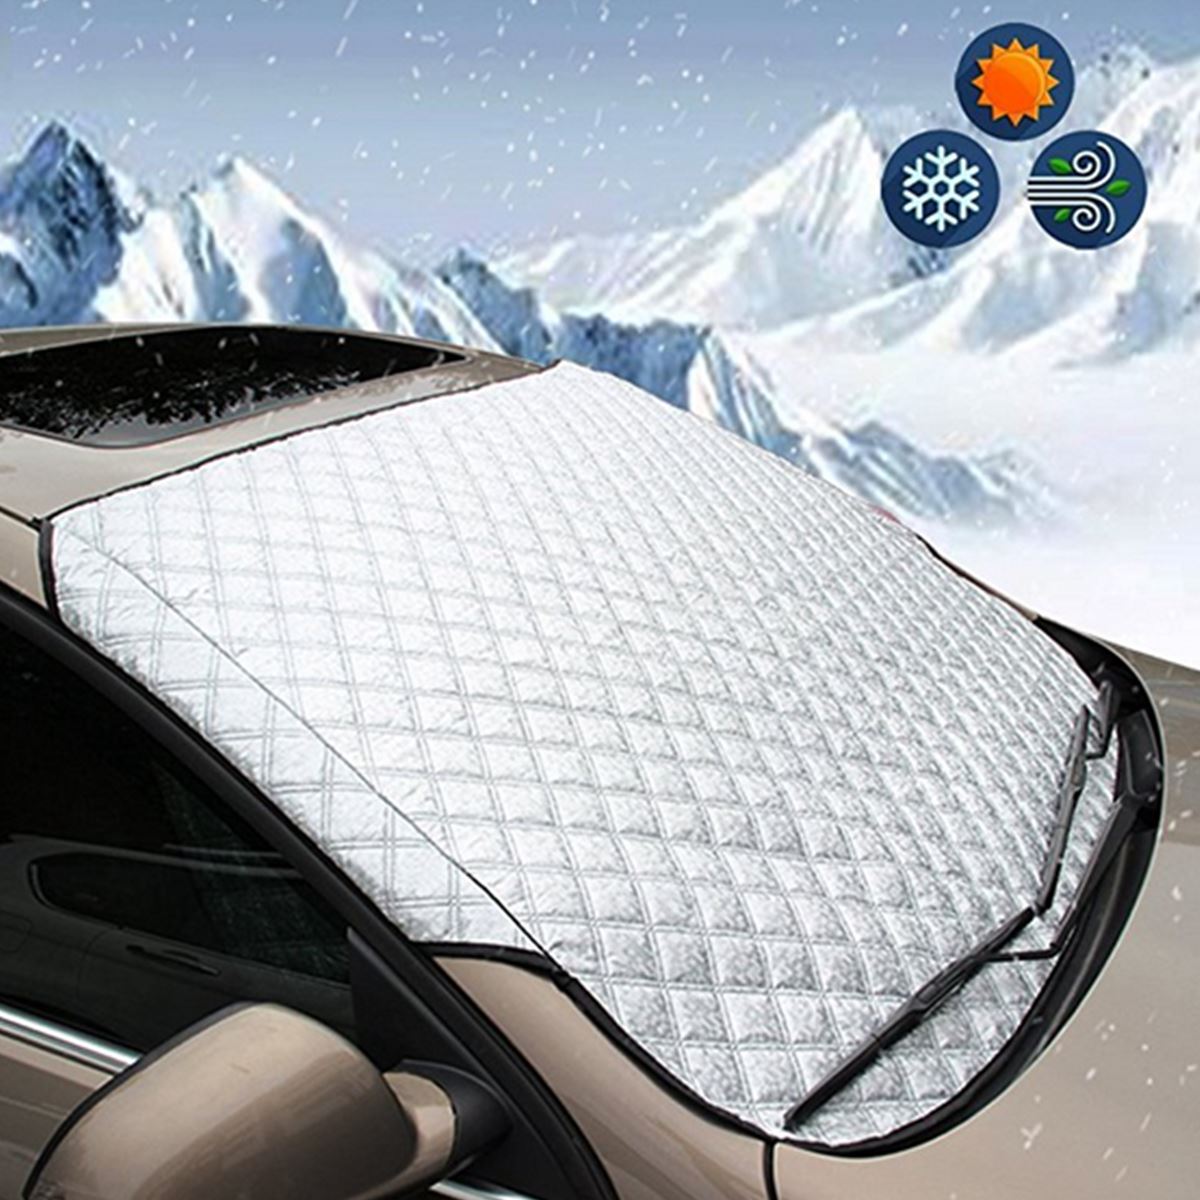 Car Windshield Snow Cover with 4 Layers Protection Car accessories EvoFine 